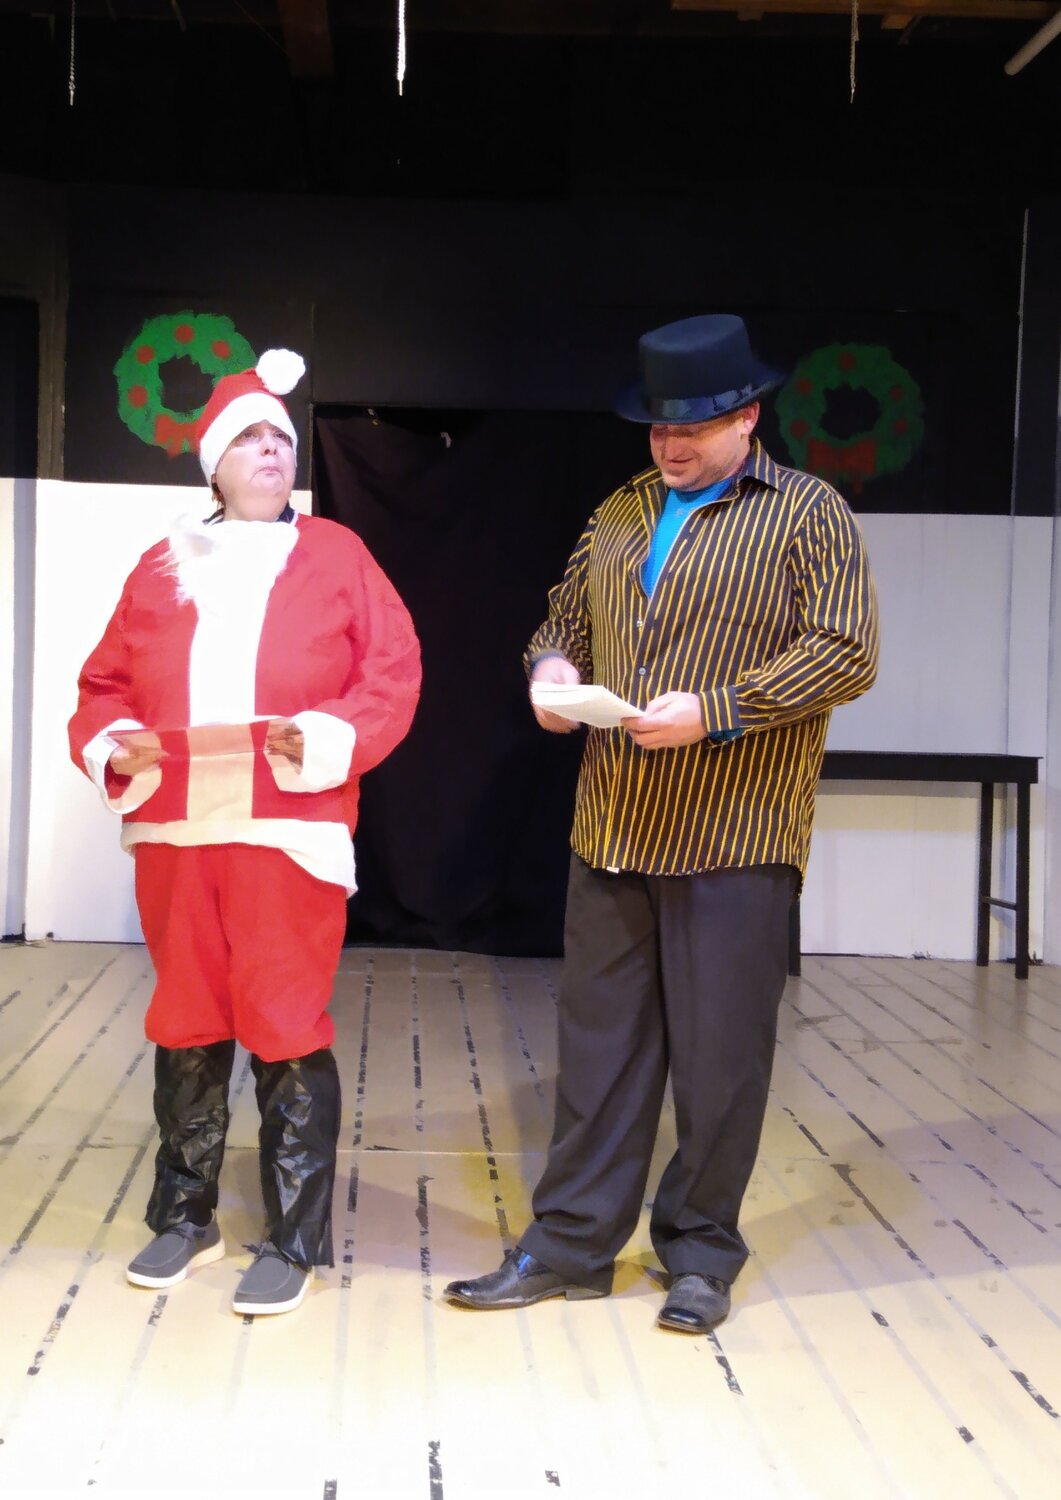 Ty Clute plays grumpy scrooge, while Kim Albers dressed as Santa plays Brynn a cast member who took an antihistamine that has made her loopy an she can't remember what play she is in and comes out as all the wrong characters.